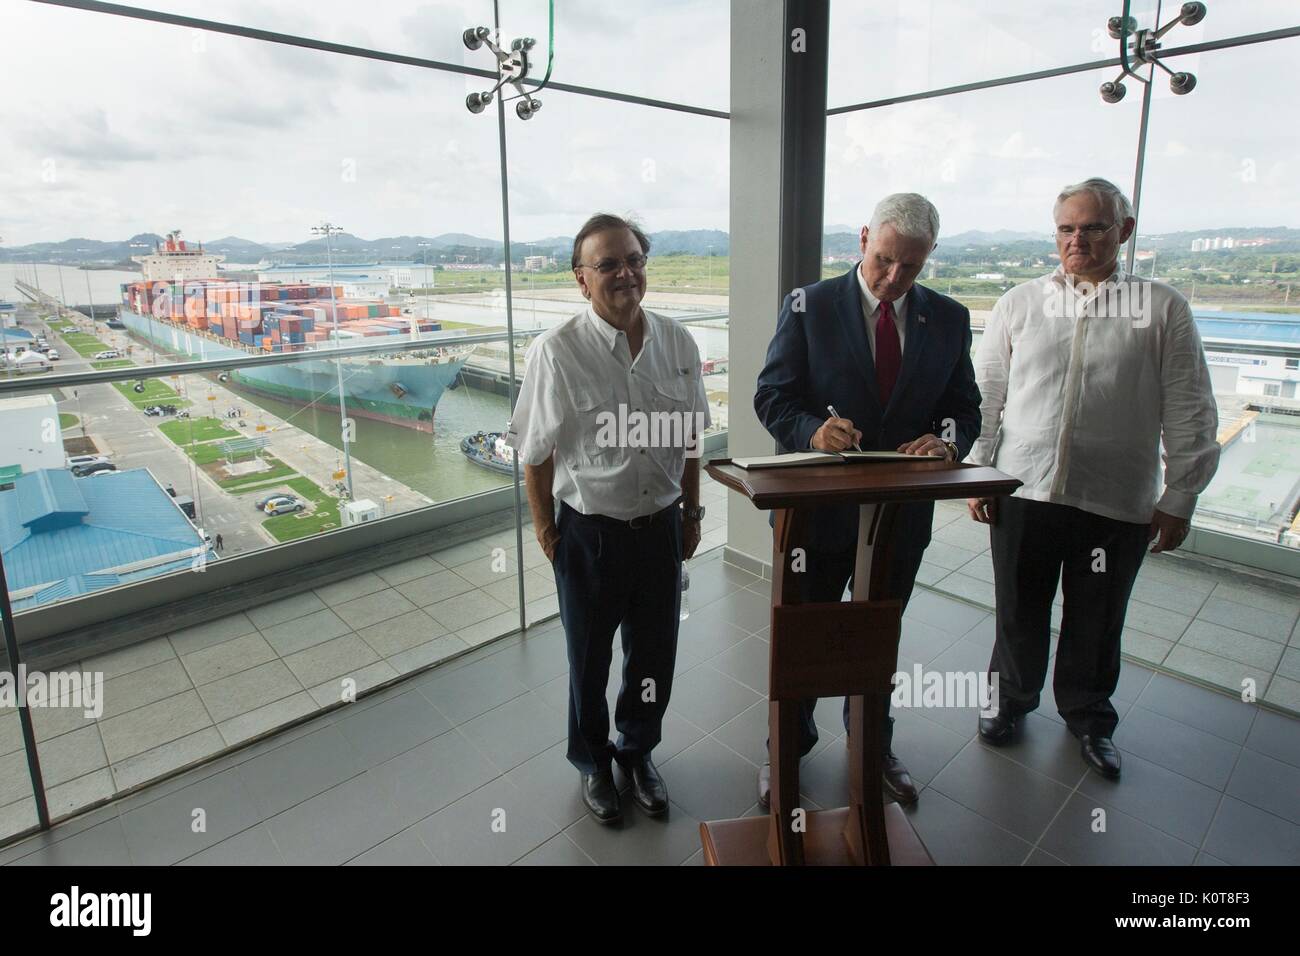 U.S. Vice President Mike Pence, signs the guest book as he arrives for a tour of the Panama Canal with Administrator Jorge Quijano, right, August 17, 2017 in Panama City, Panama. Pence has been on a week-long tour of Latin America. Stock Photo